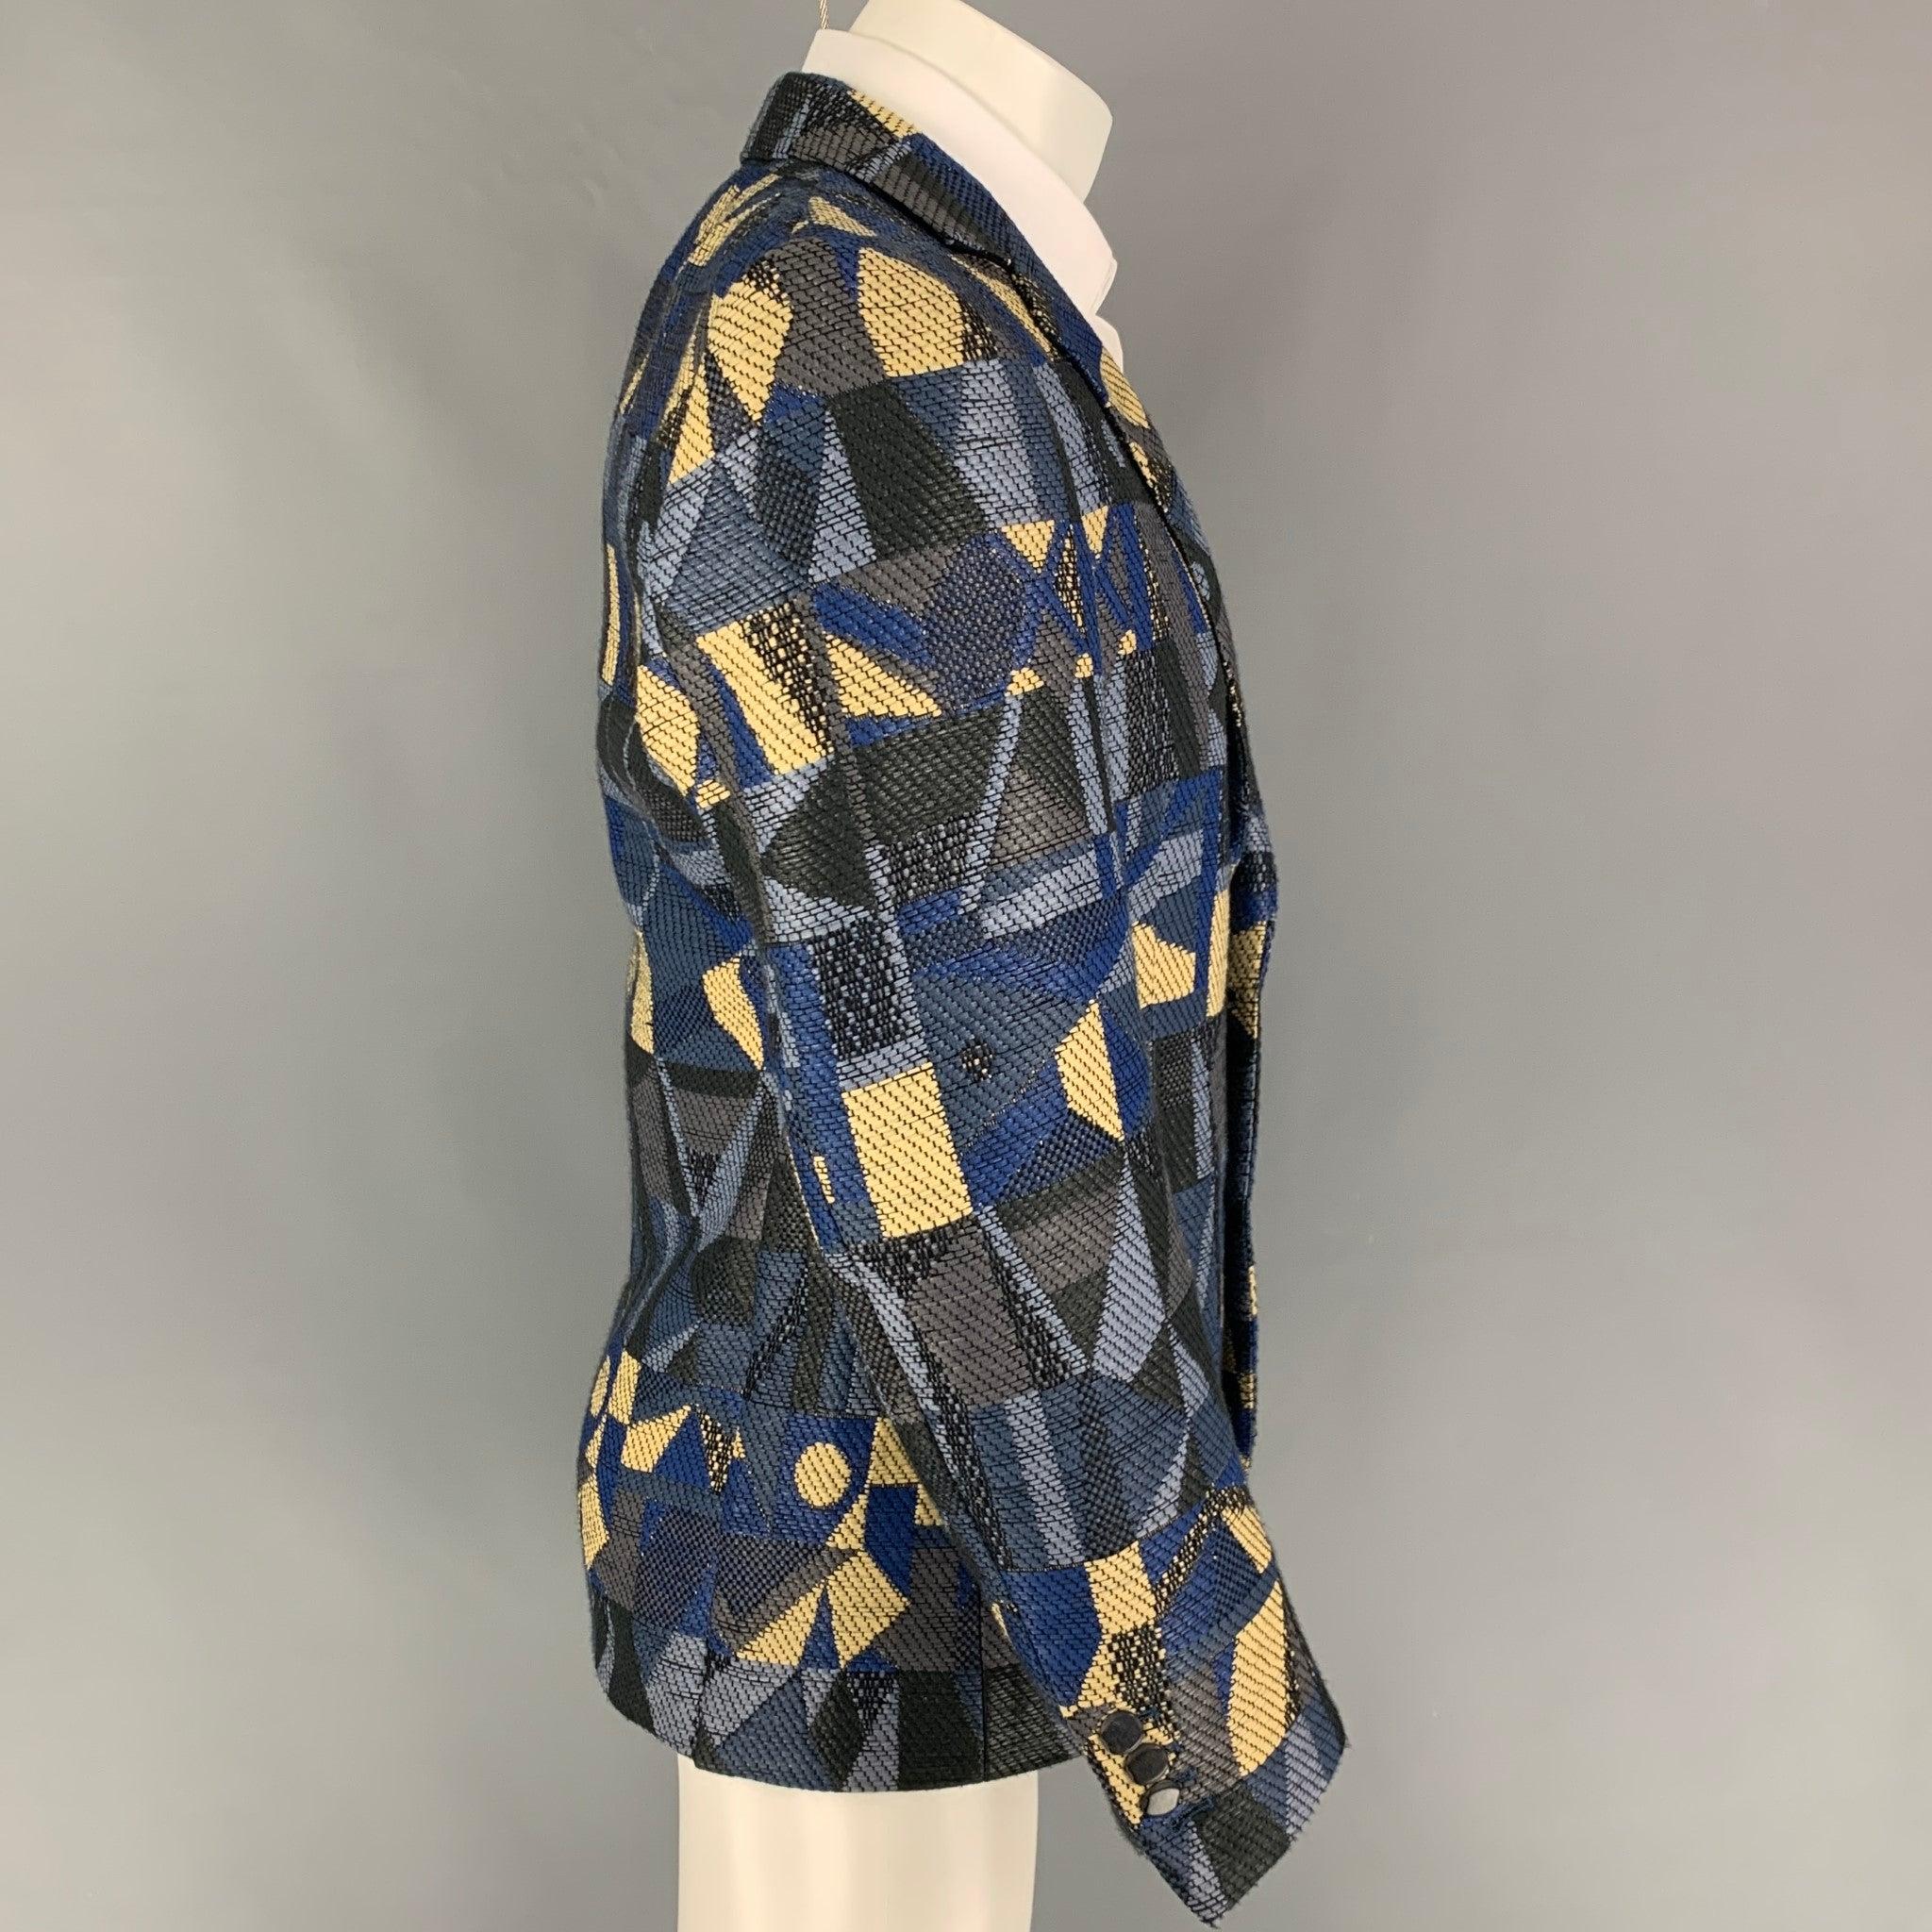 WALTER VAN BEIRENDONCK SS 14 sport coat comes in a multi-color woven cotton / acrylic with a half liner featuring a notch lapel, flap pockets, and a double button closure. Made in Belgium.Excellent
Pre-Owned Condition. 

Marked:   52 

Measurements: